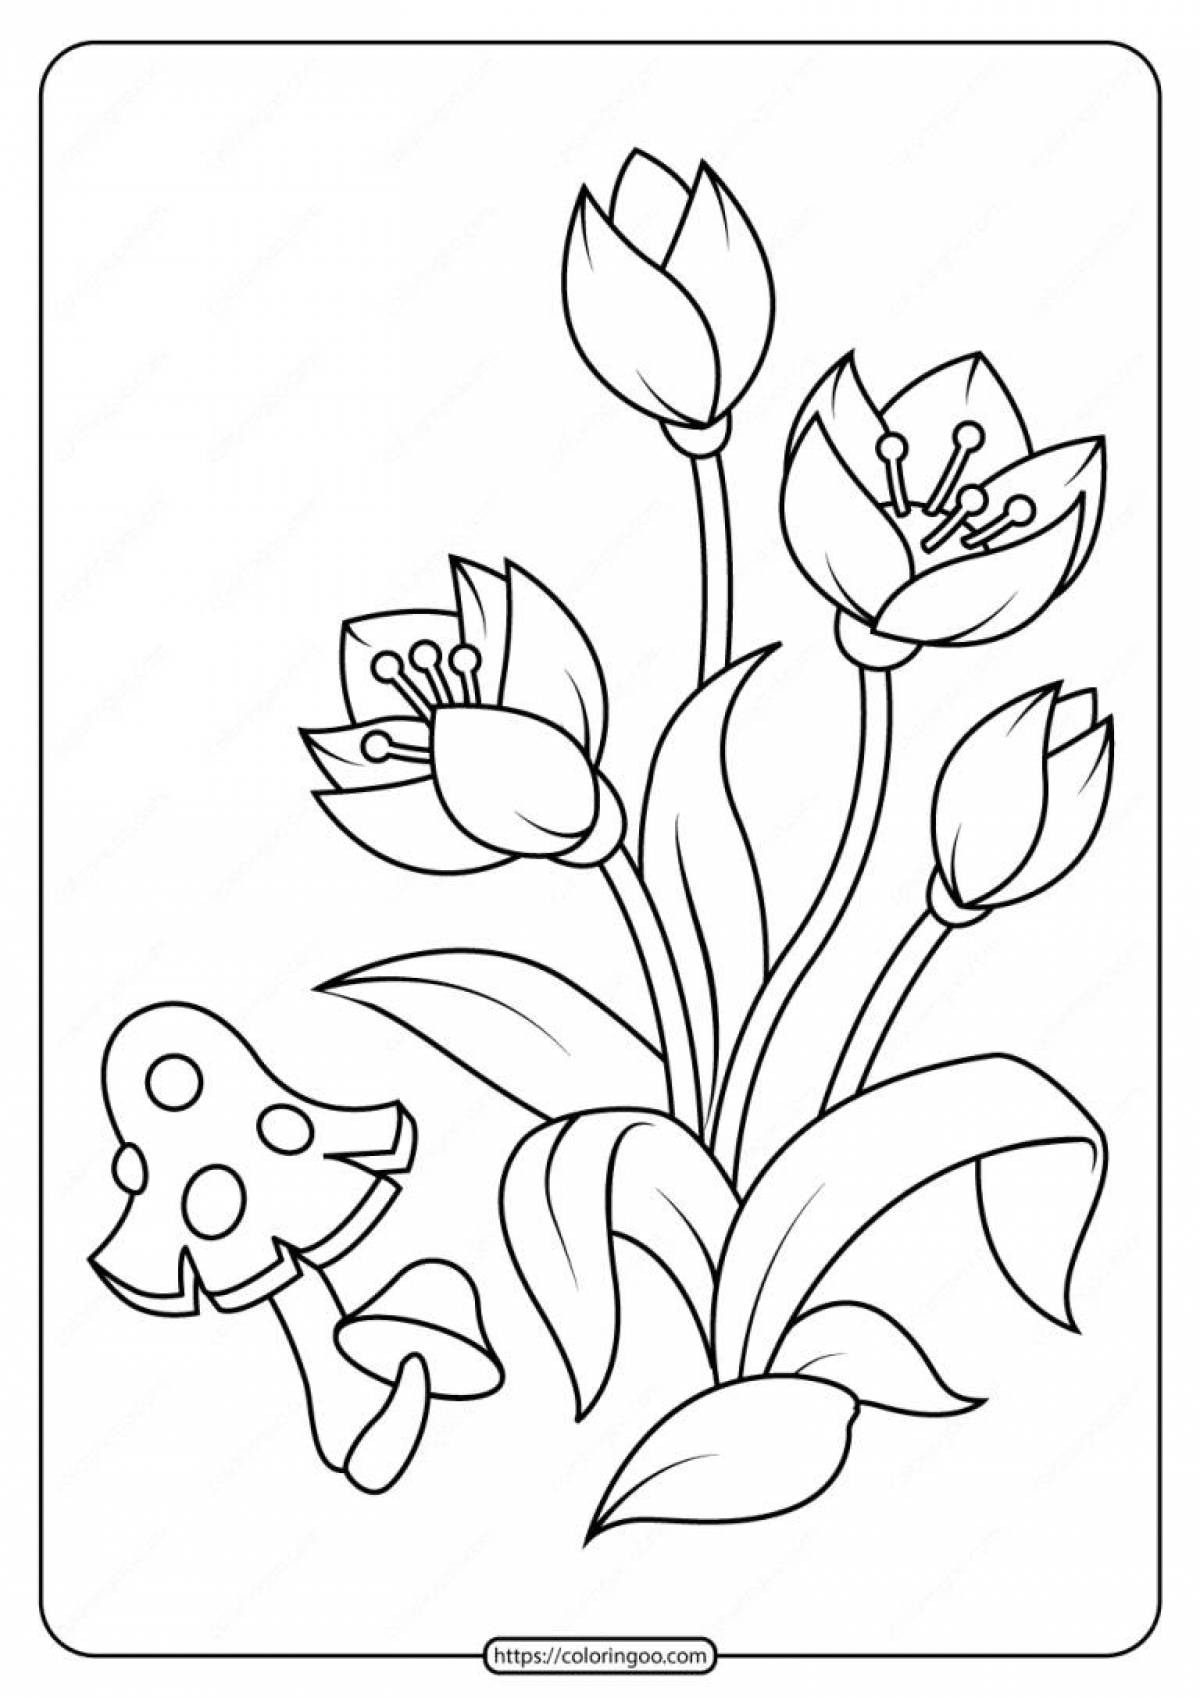 Bright coloring flowers for children 4-5 years old